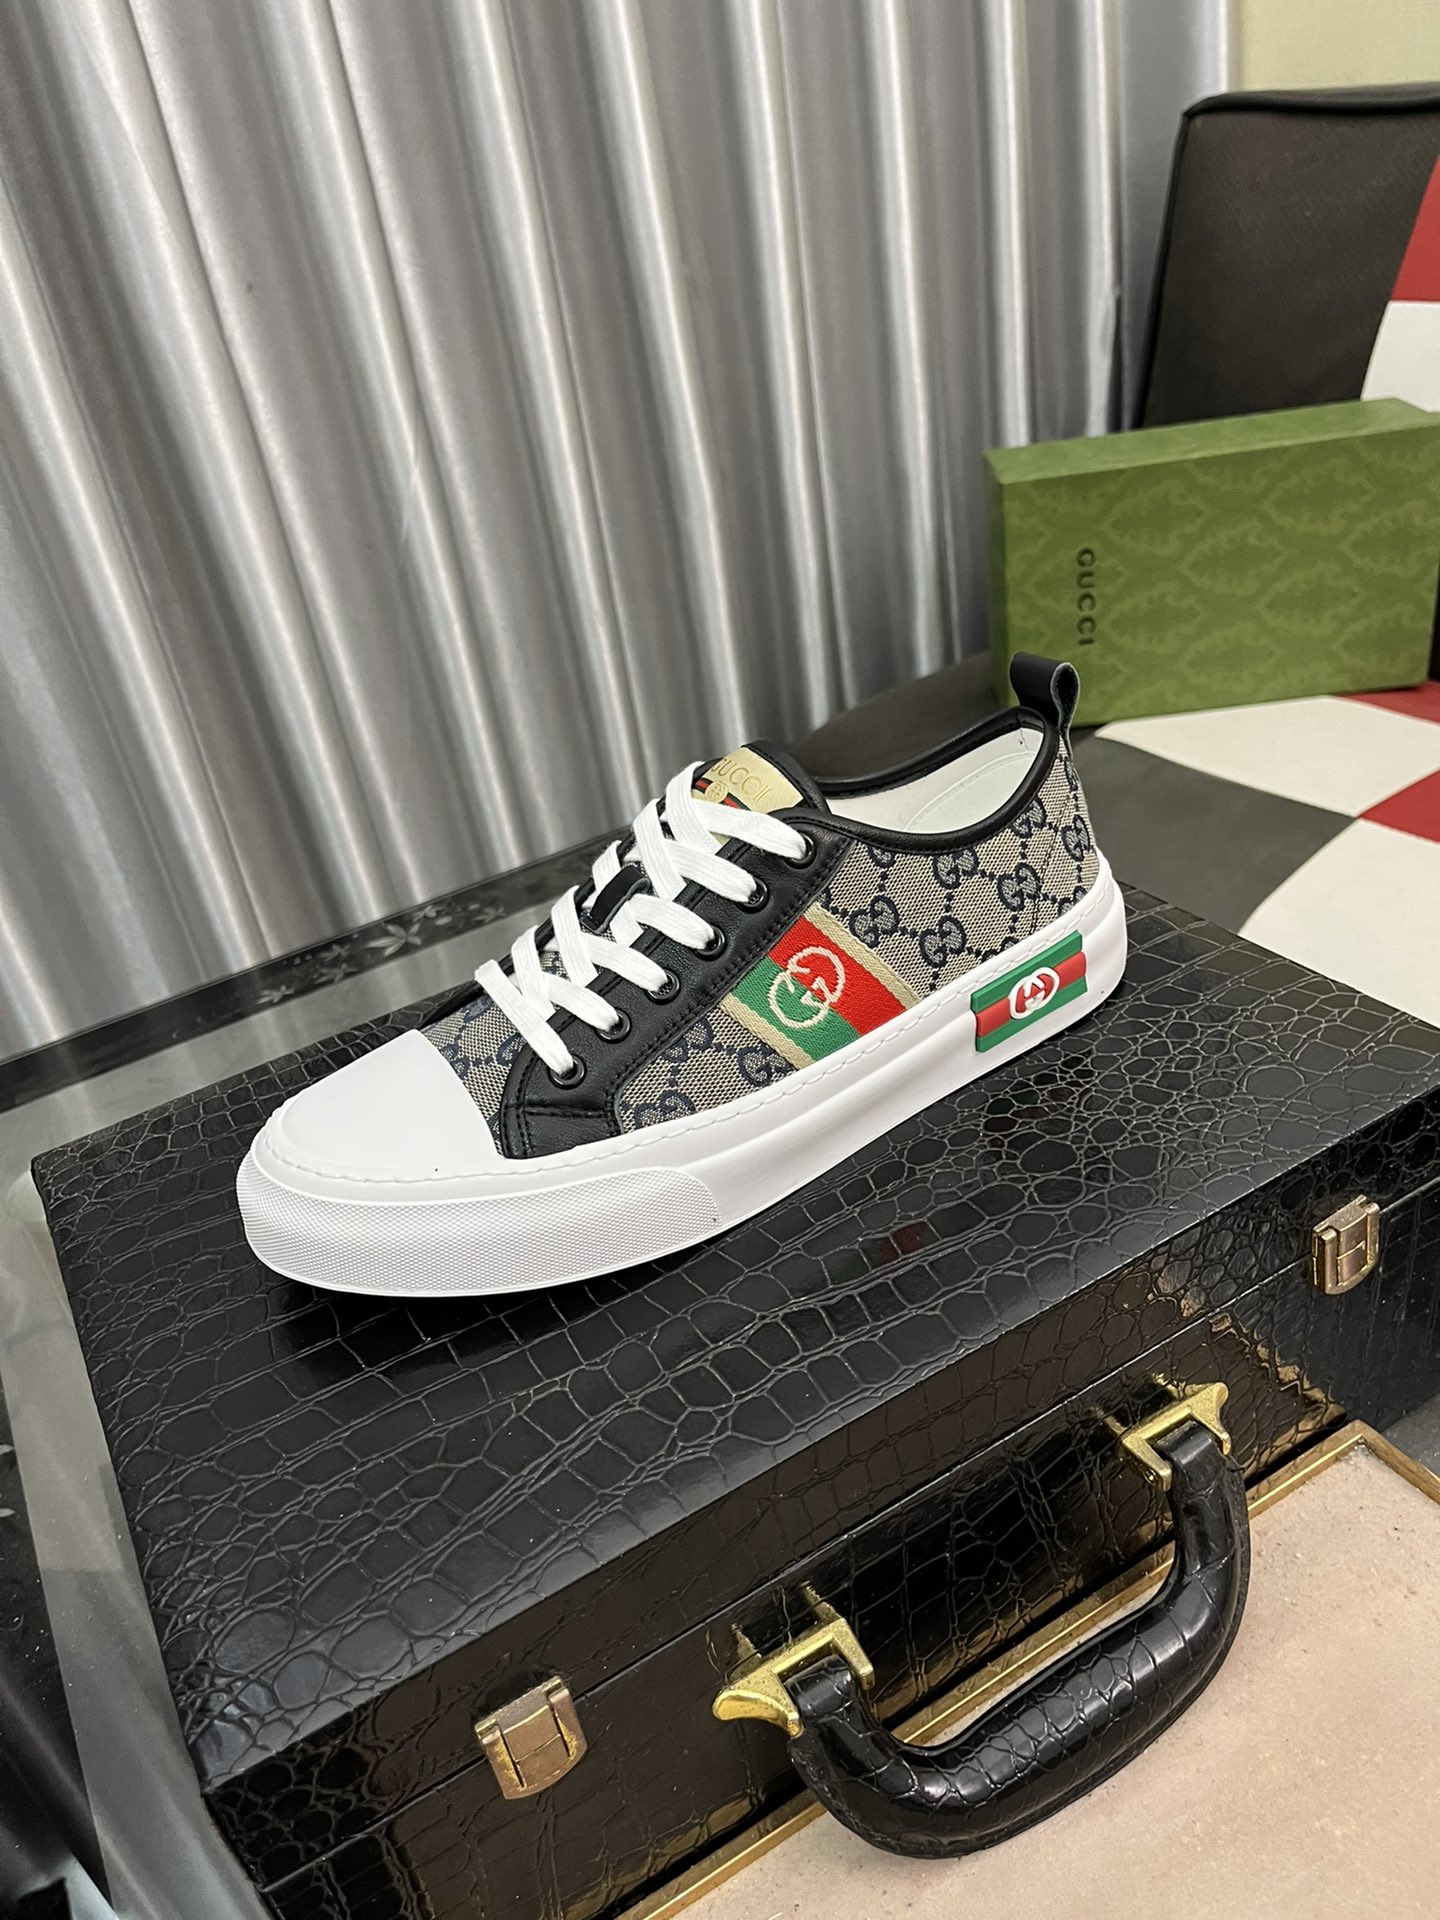 Gucci Shoes Sneakers Buy the Best High Quality Replica
 Rubber Sheepskin Casual